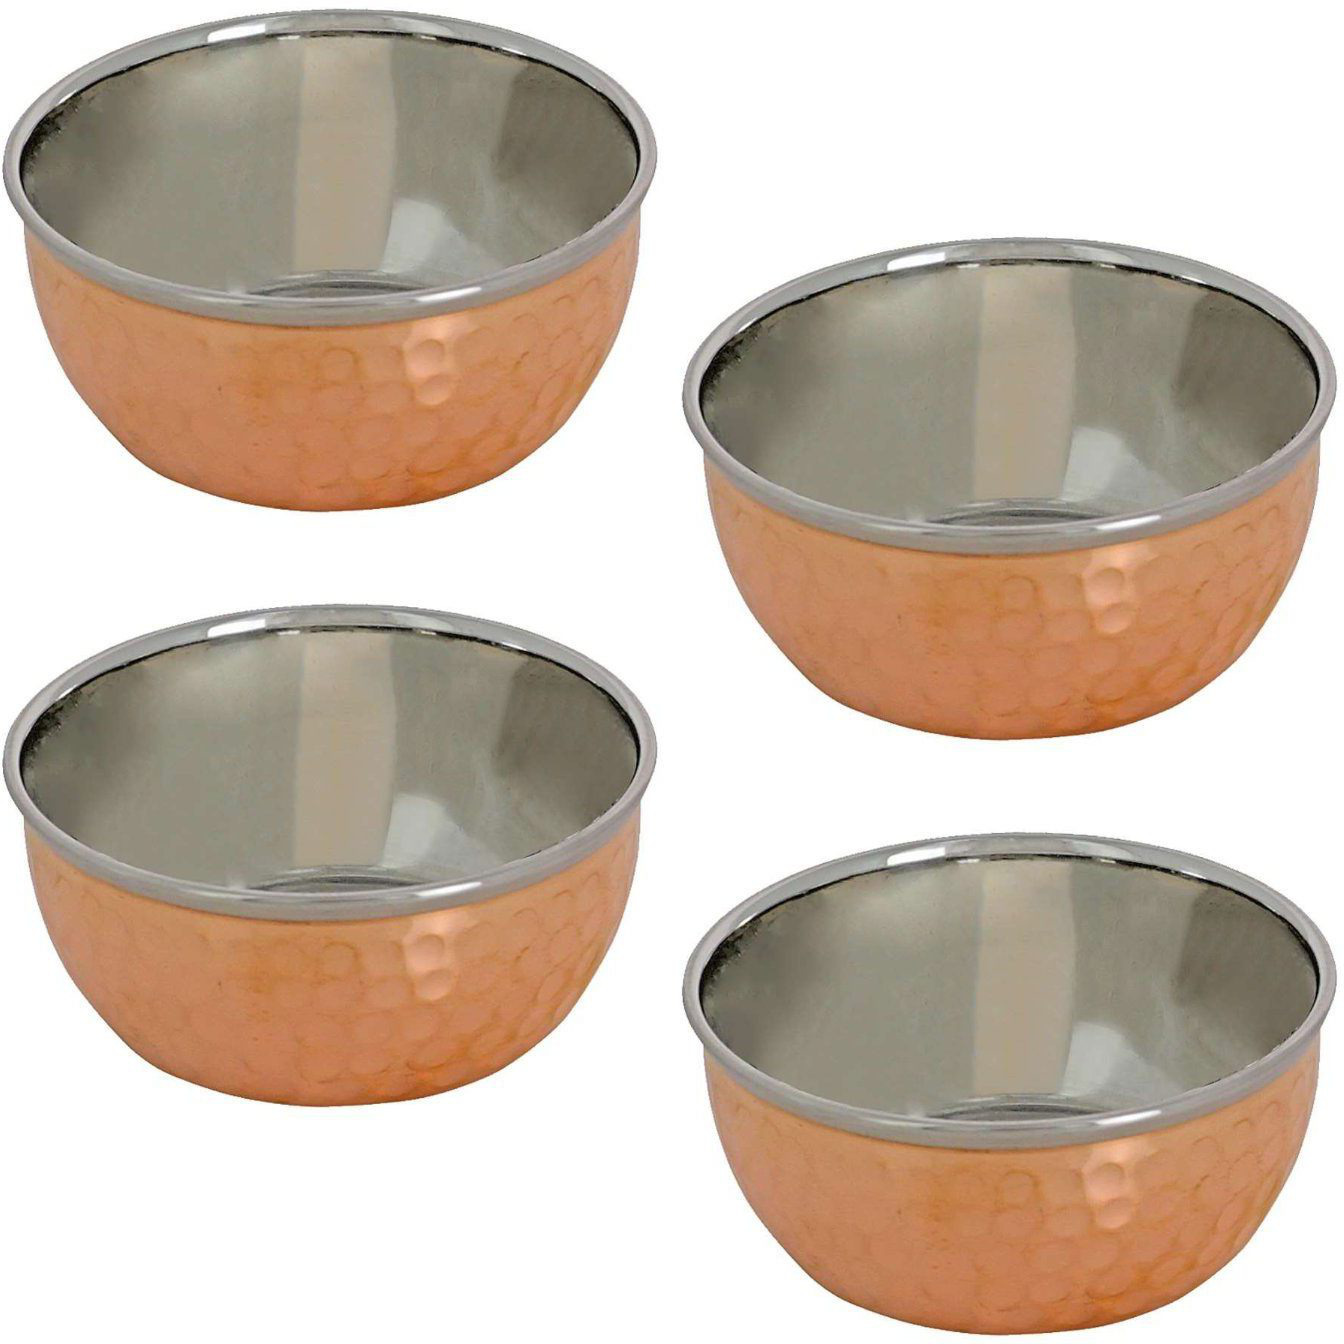 Prisha India Craft B. Set of 5 Dinnerware Traditional Stainless Steel Copper Dinner Set of Thali Plate, Bowls, Glass and Spoons, Dia 13  With 1 Stainless Steel Copper Pitcher Jug - Christmas Gift